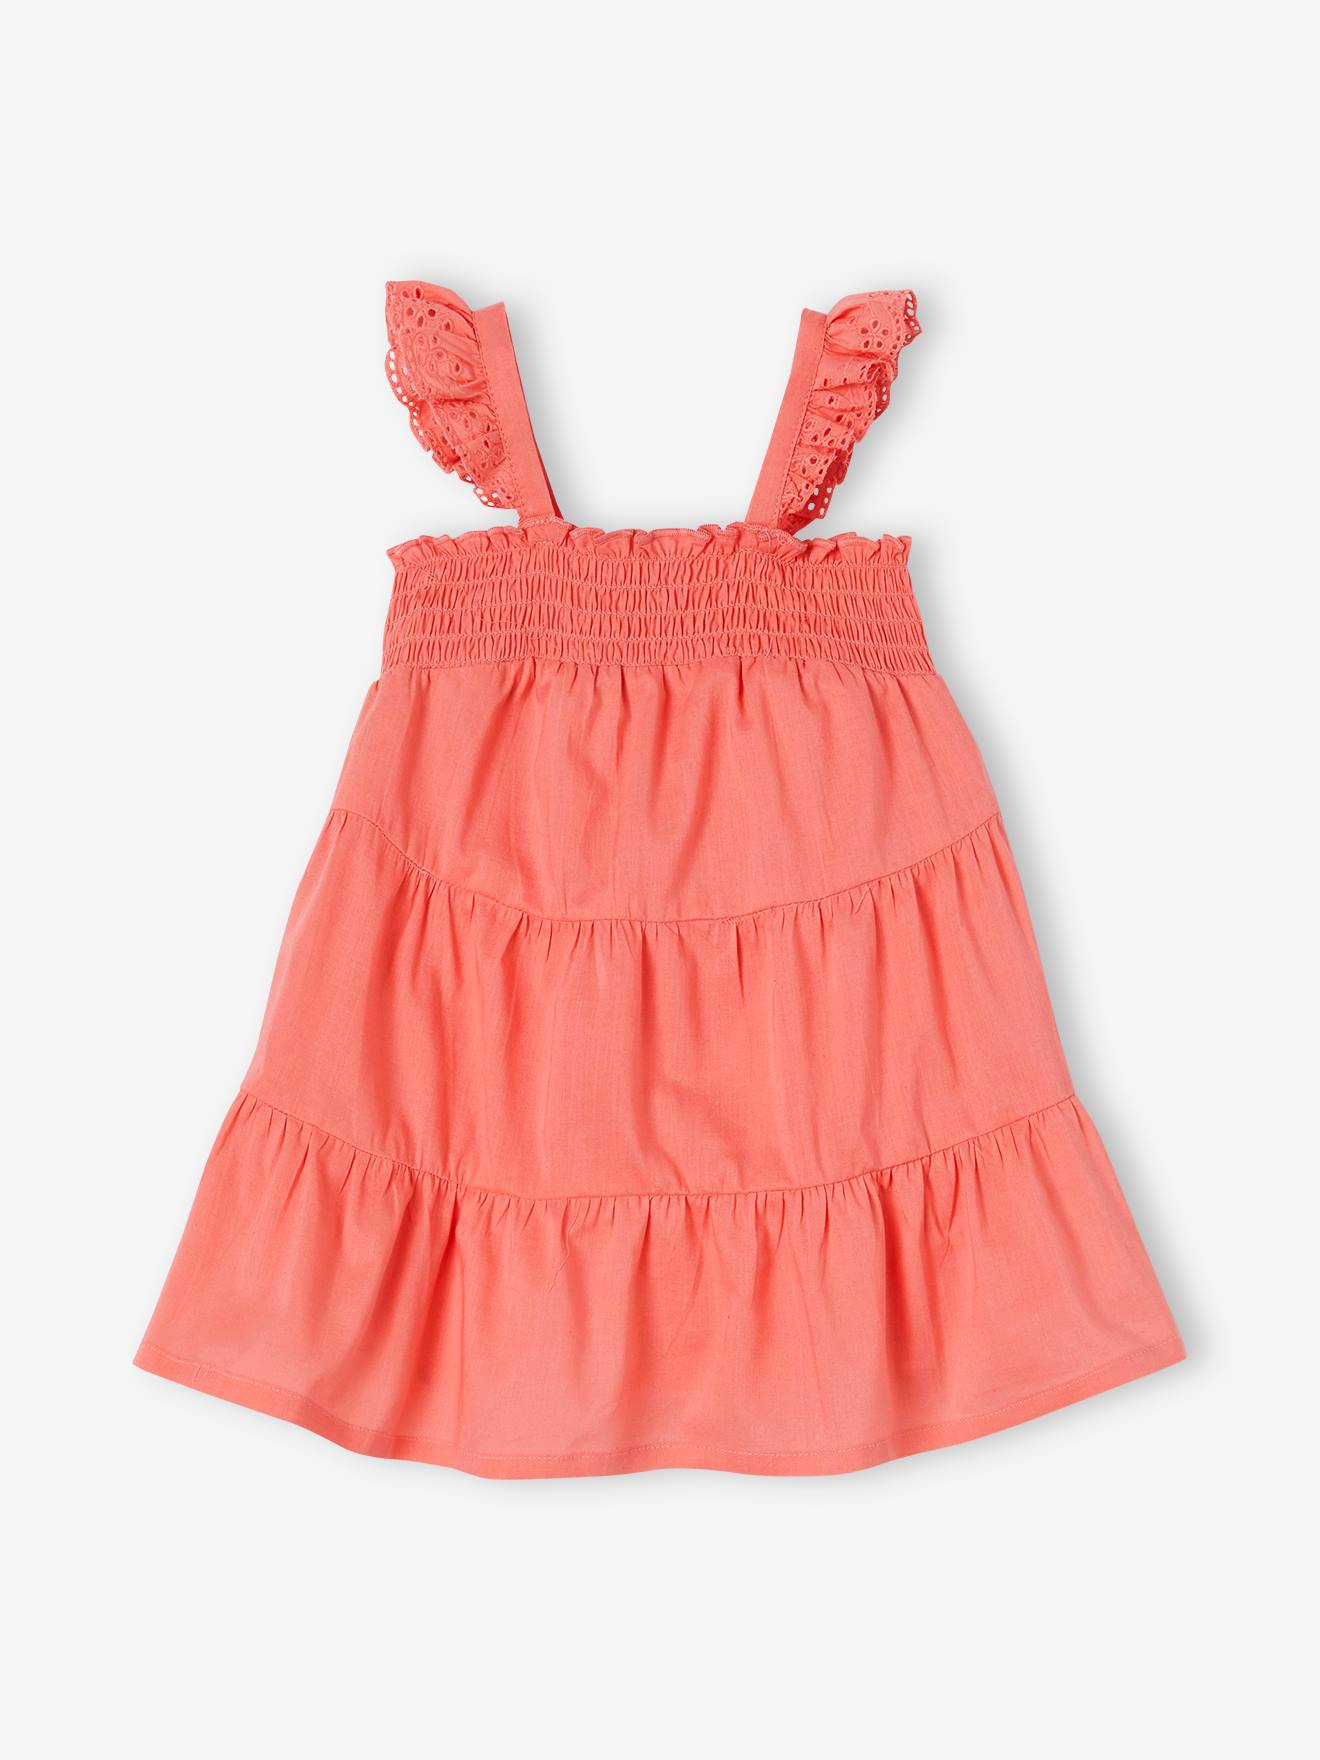 Smocked Dress with 3 Ruffles for Babies rose